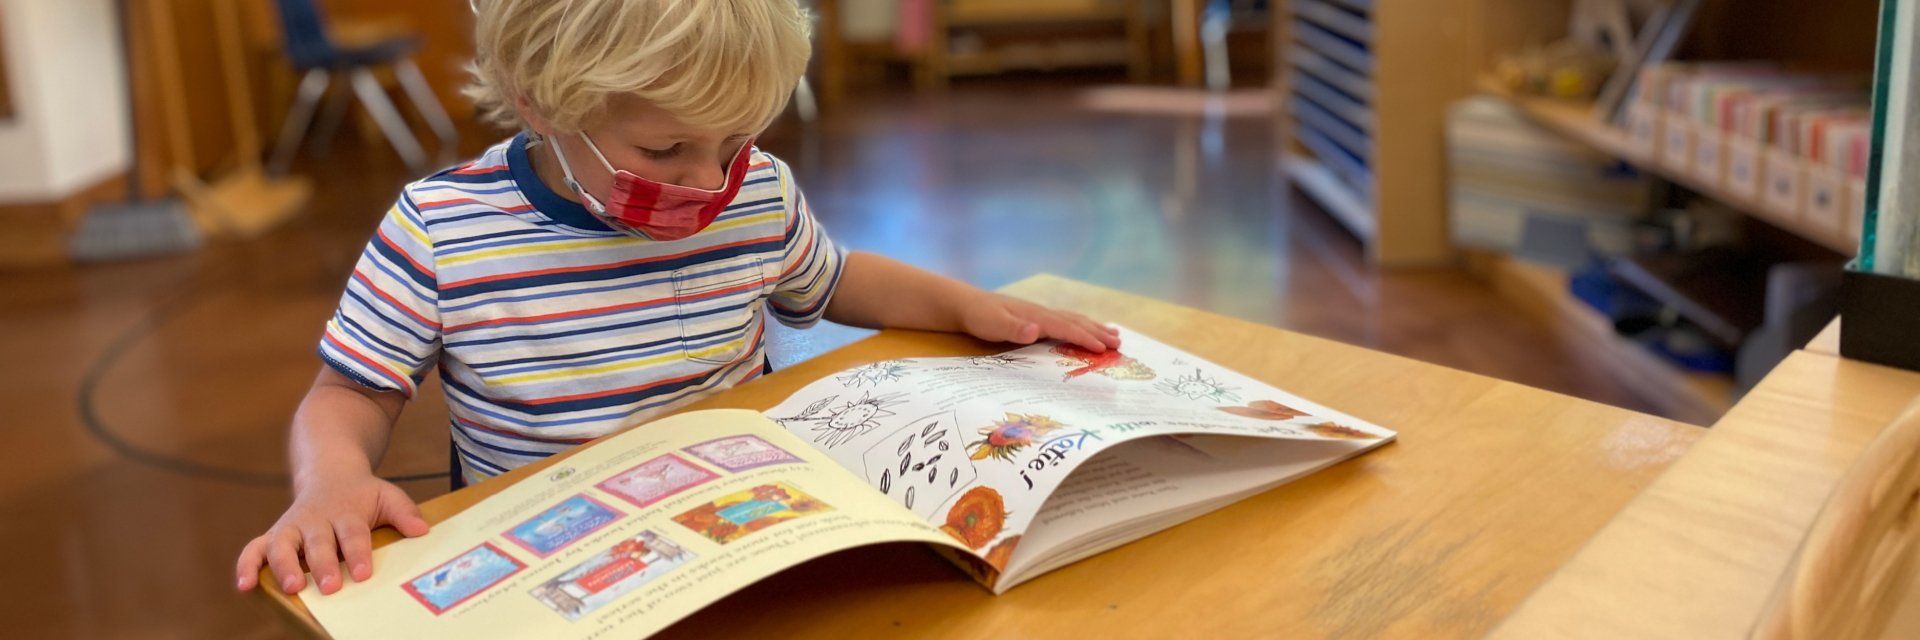 preschool aged child enthralled with a large book